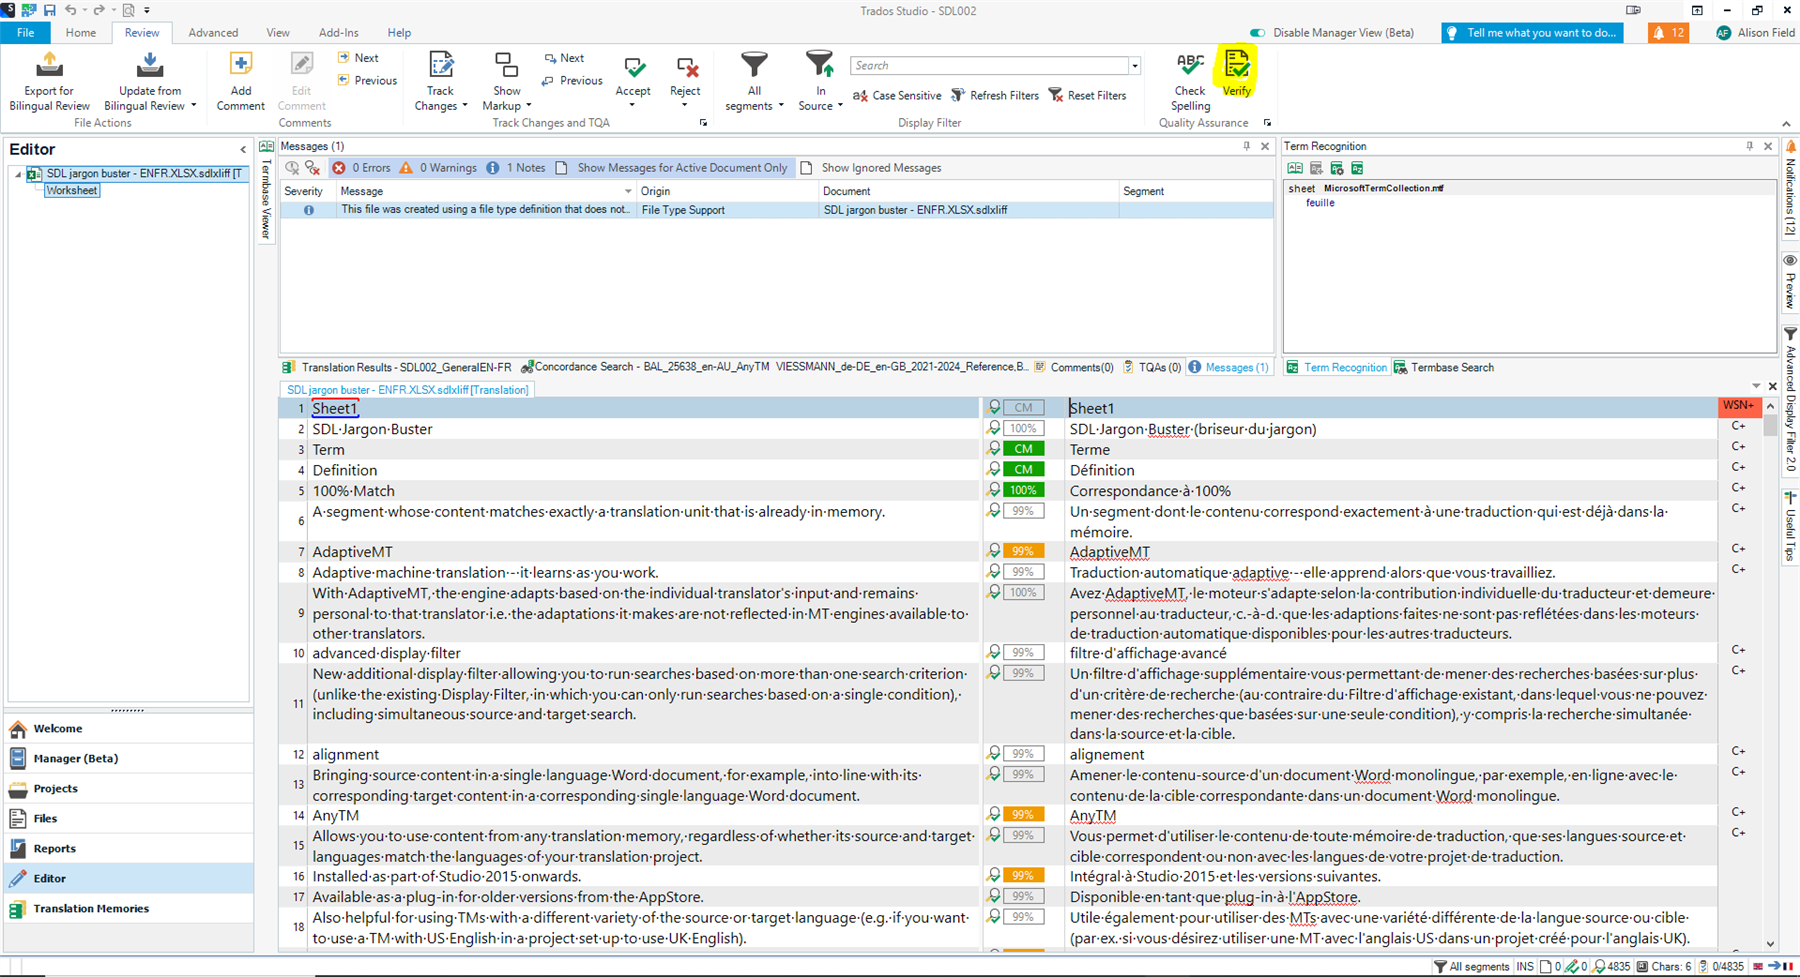 Screenshot of Trados Studio interface showing an open project with a warning message about file type support and various translation segments.